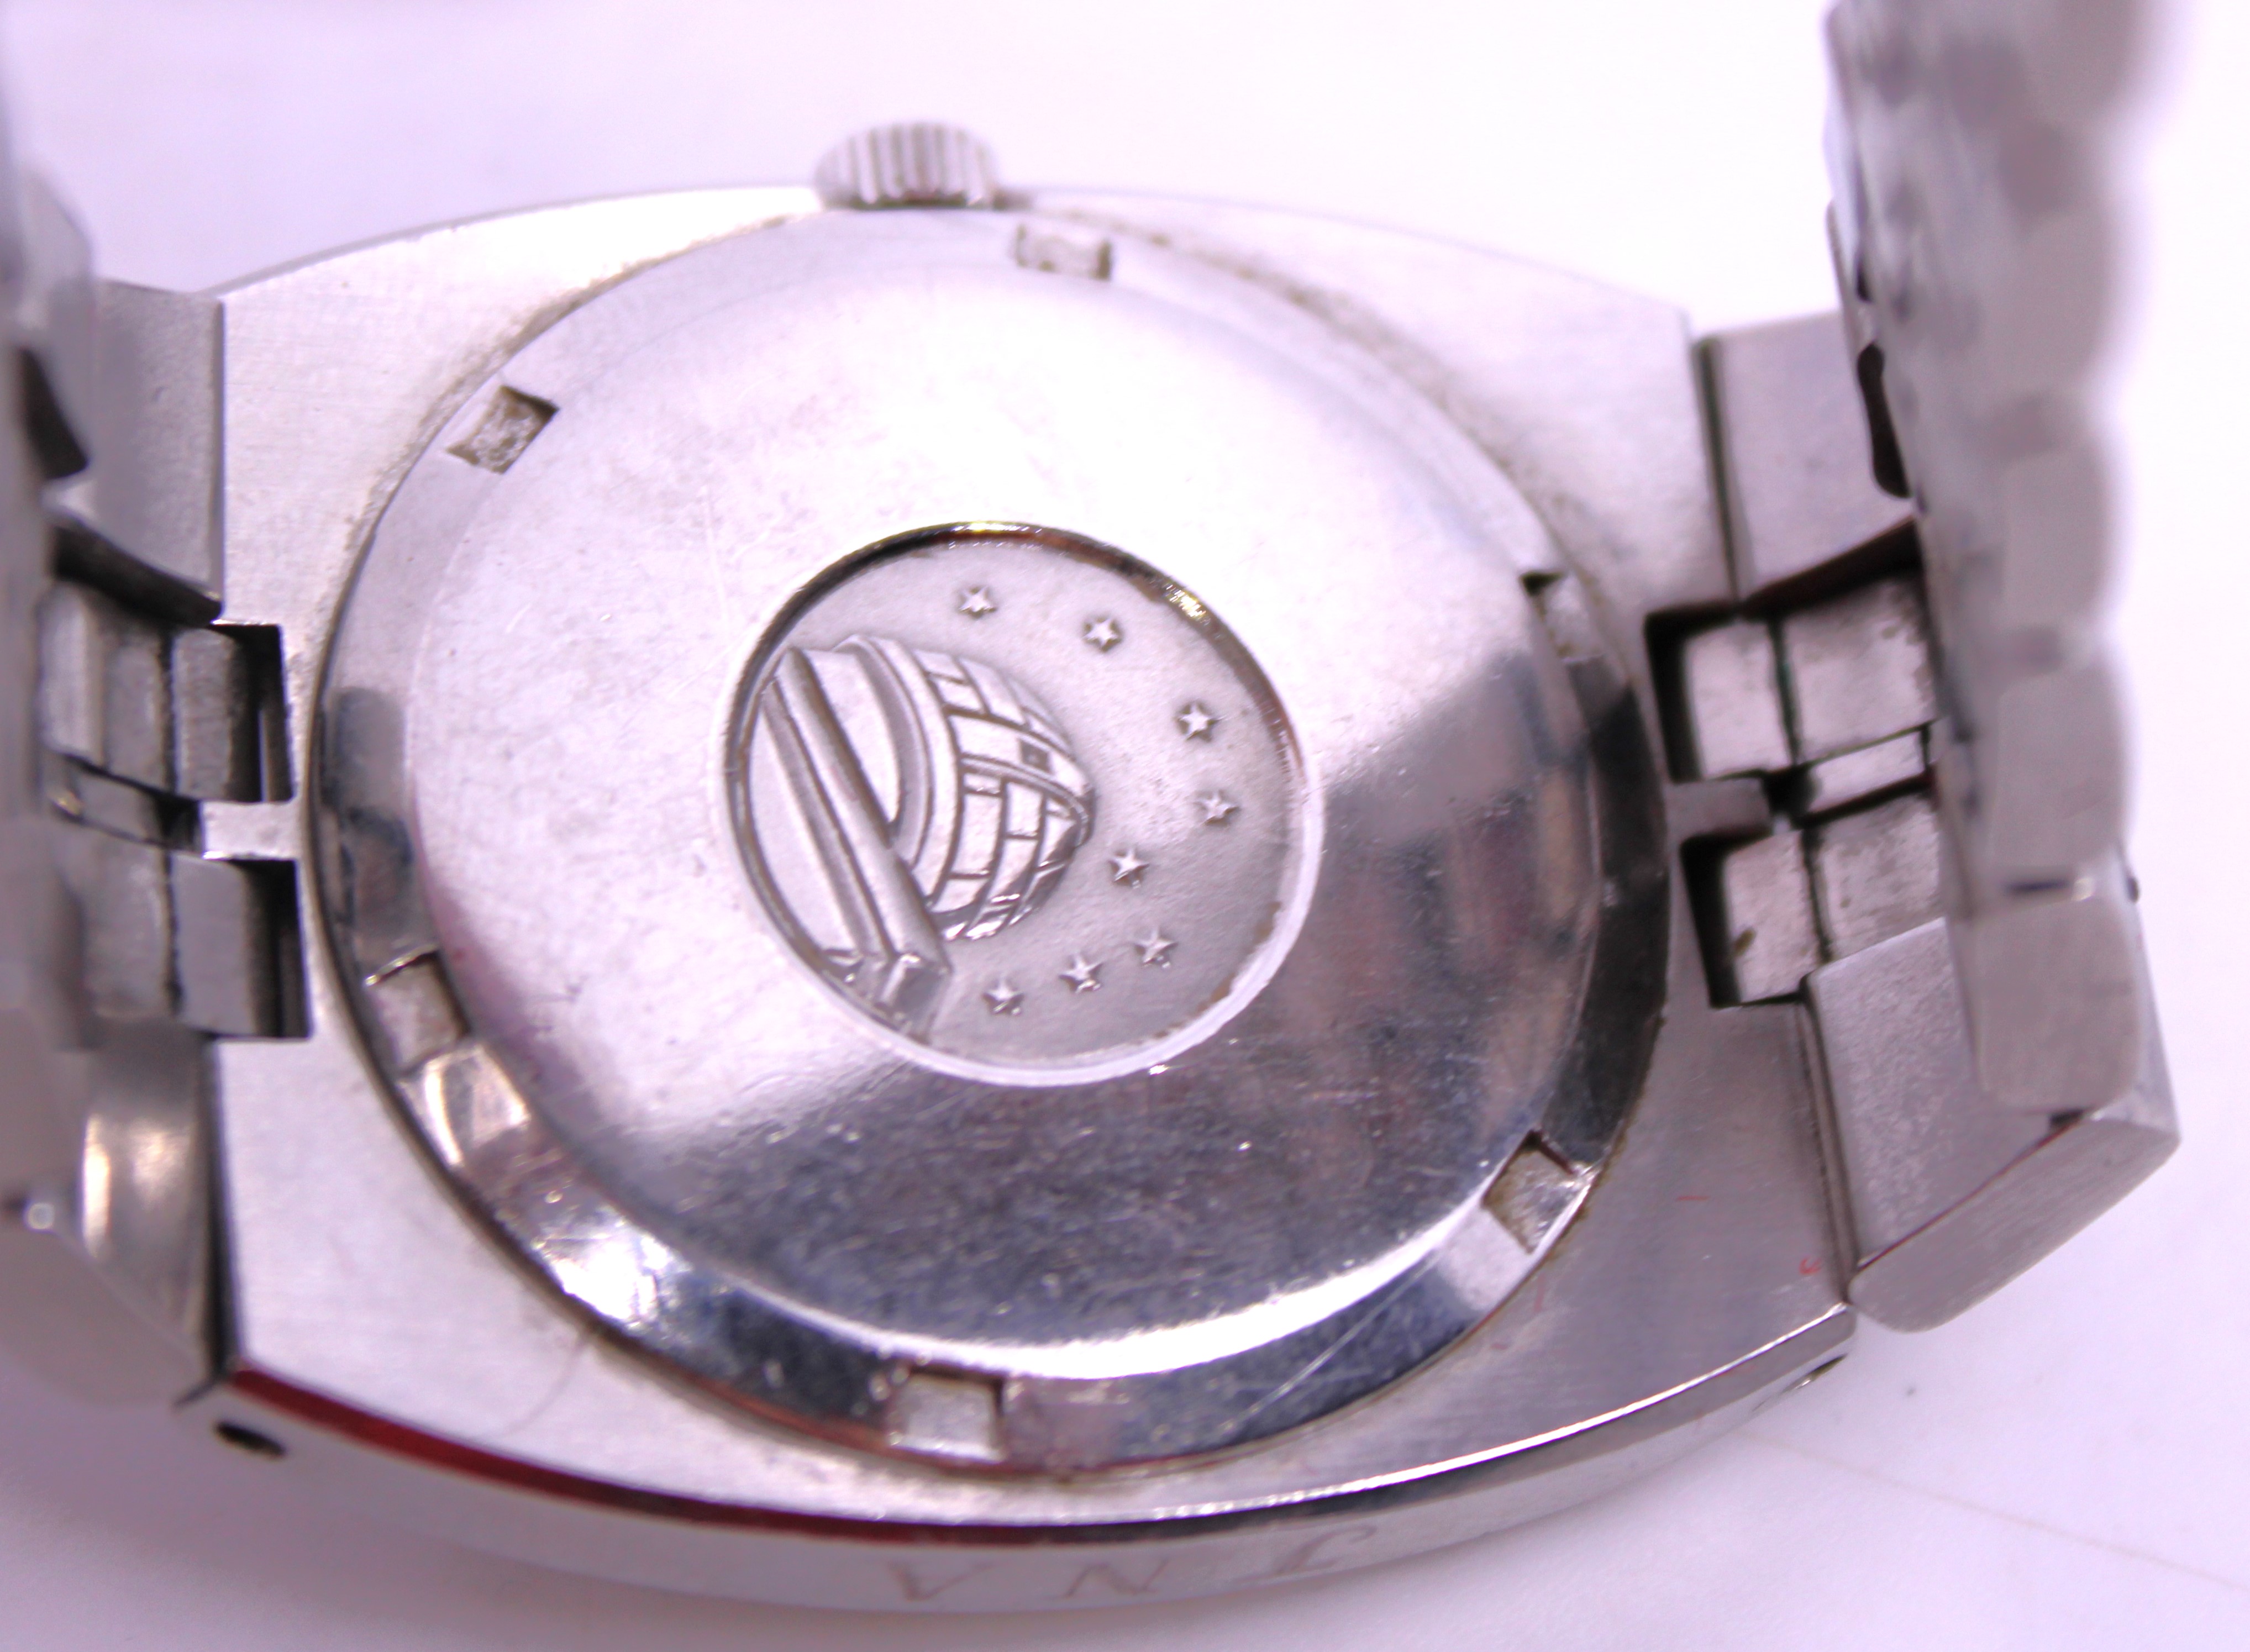 Men's Vintage 1970's? Omega Constellation Automatic Watch. Comes boxed with International Guarantee. - Image 3 of 7